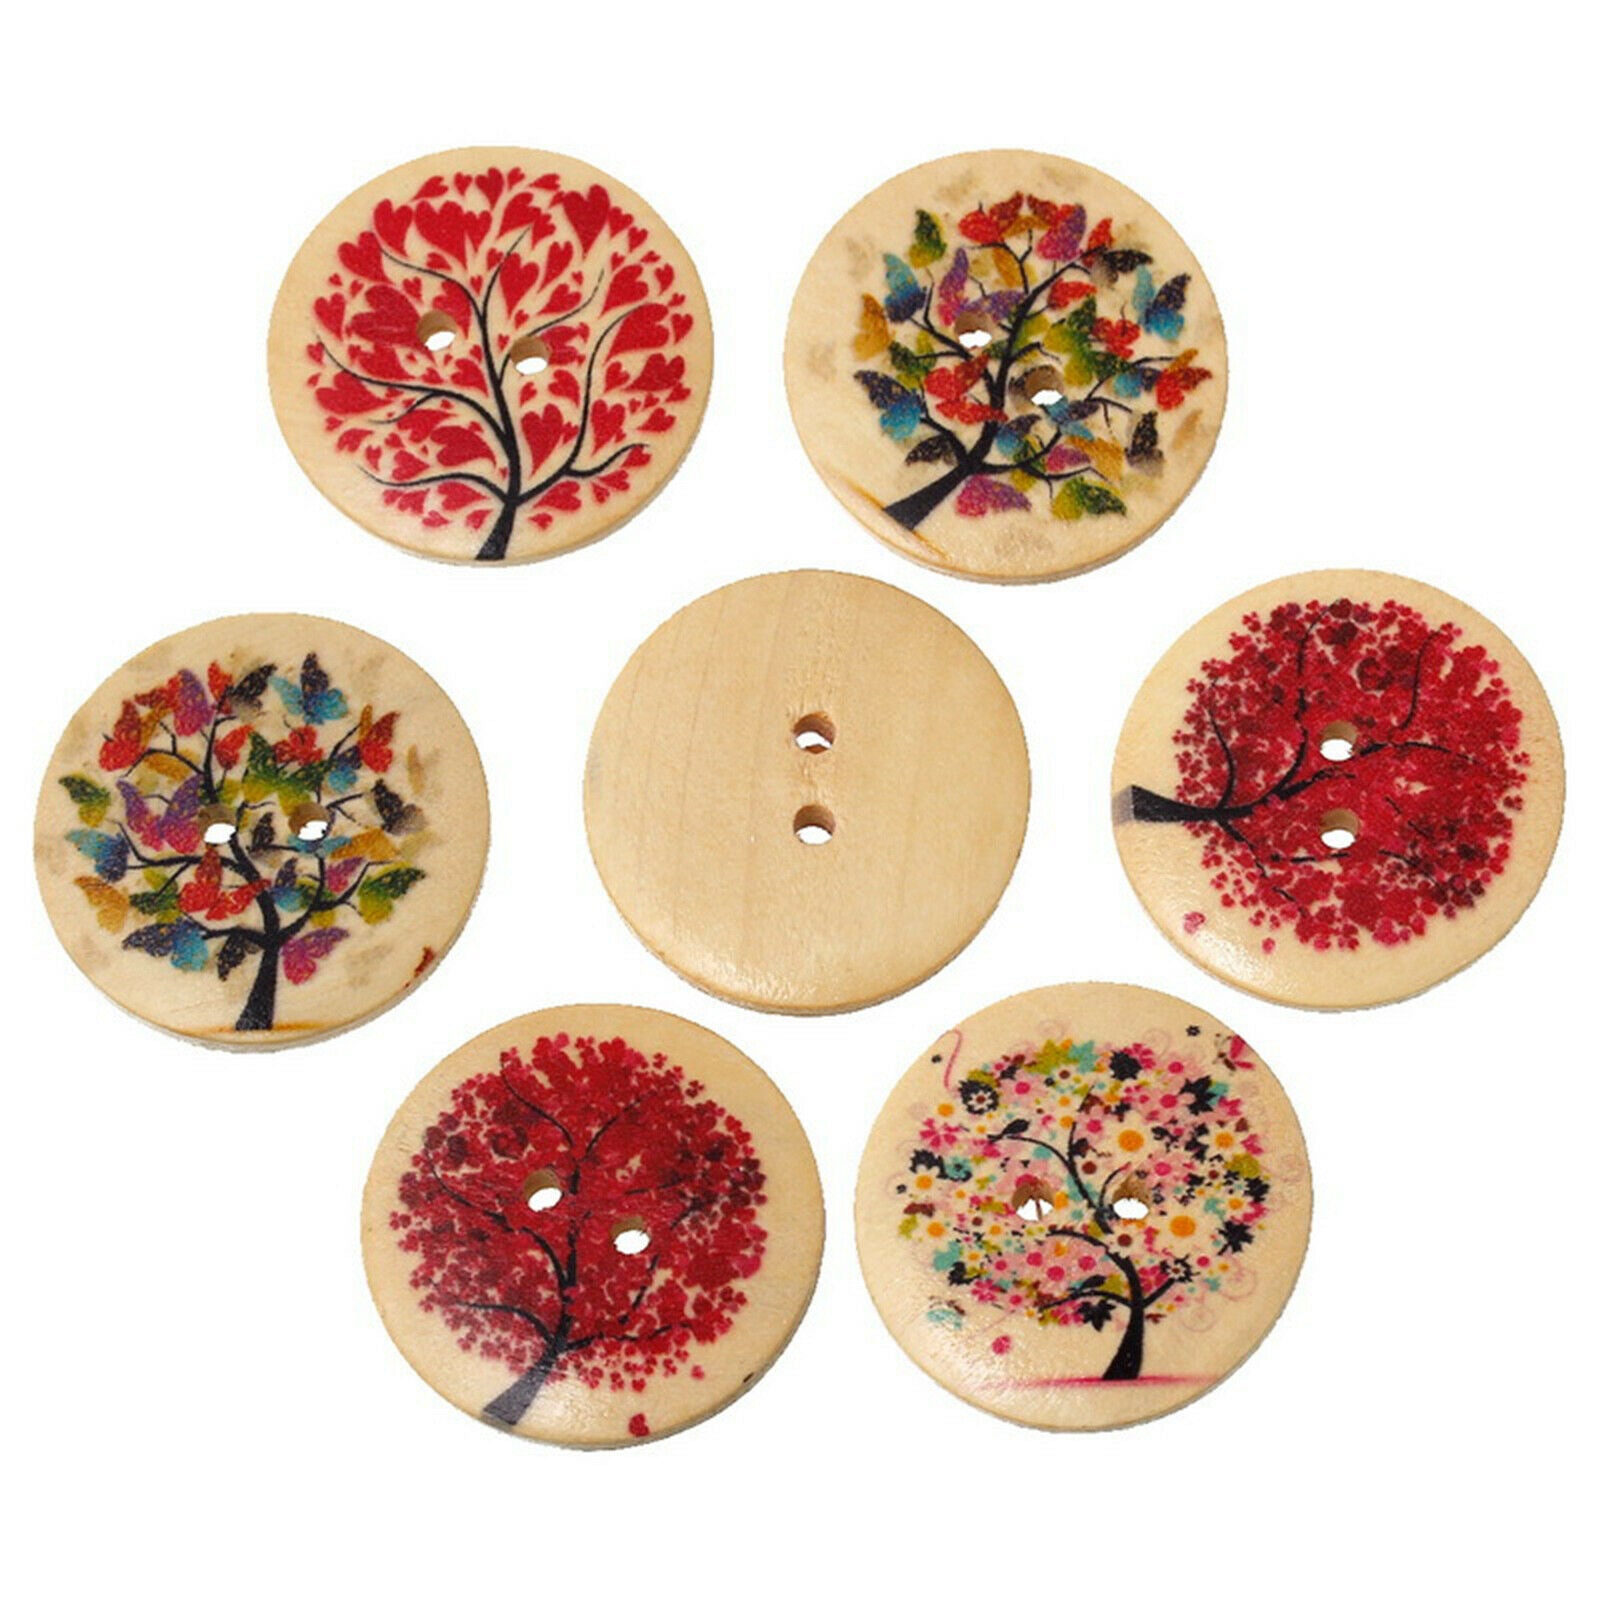 Lot 20x Mixed 2 Holes Wooden Buttons Sewing Scrapbooking DIY Craft 30mm